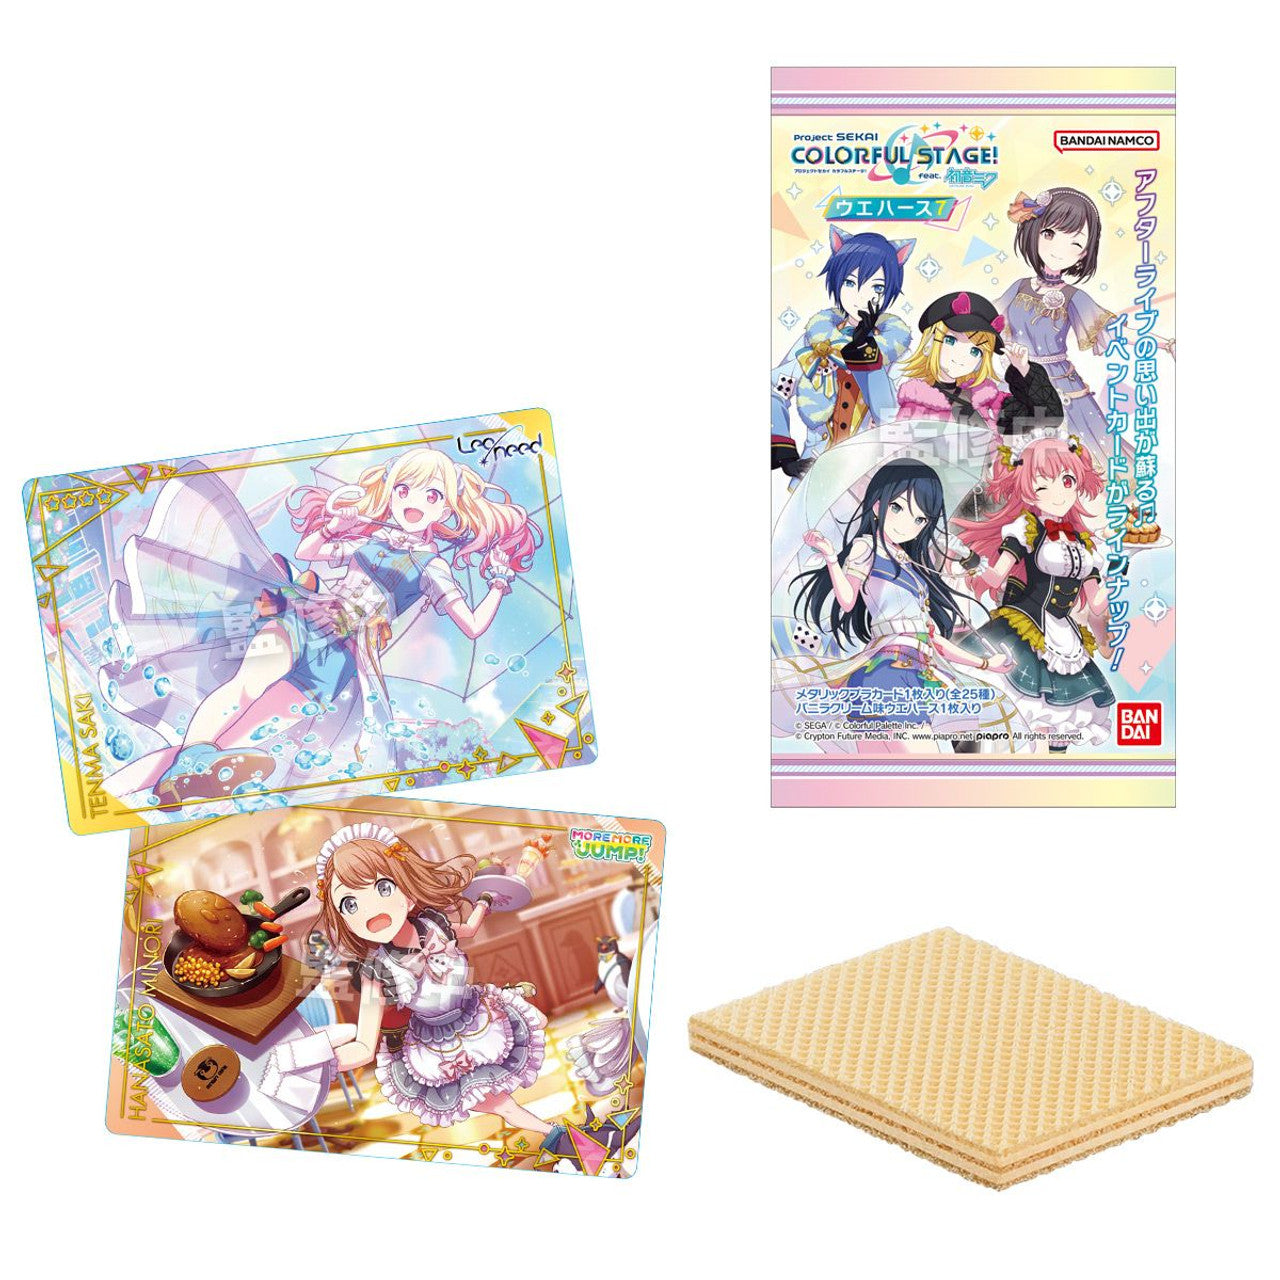 Bandai Candy Project SEKAI Colorful Stage! feat. Hatsune Miku Metallic Card Collection Vol.7